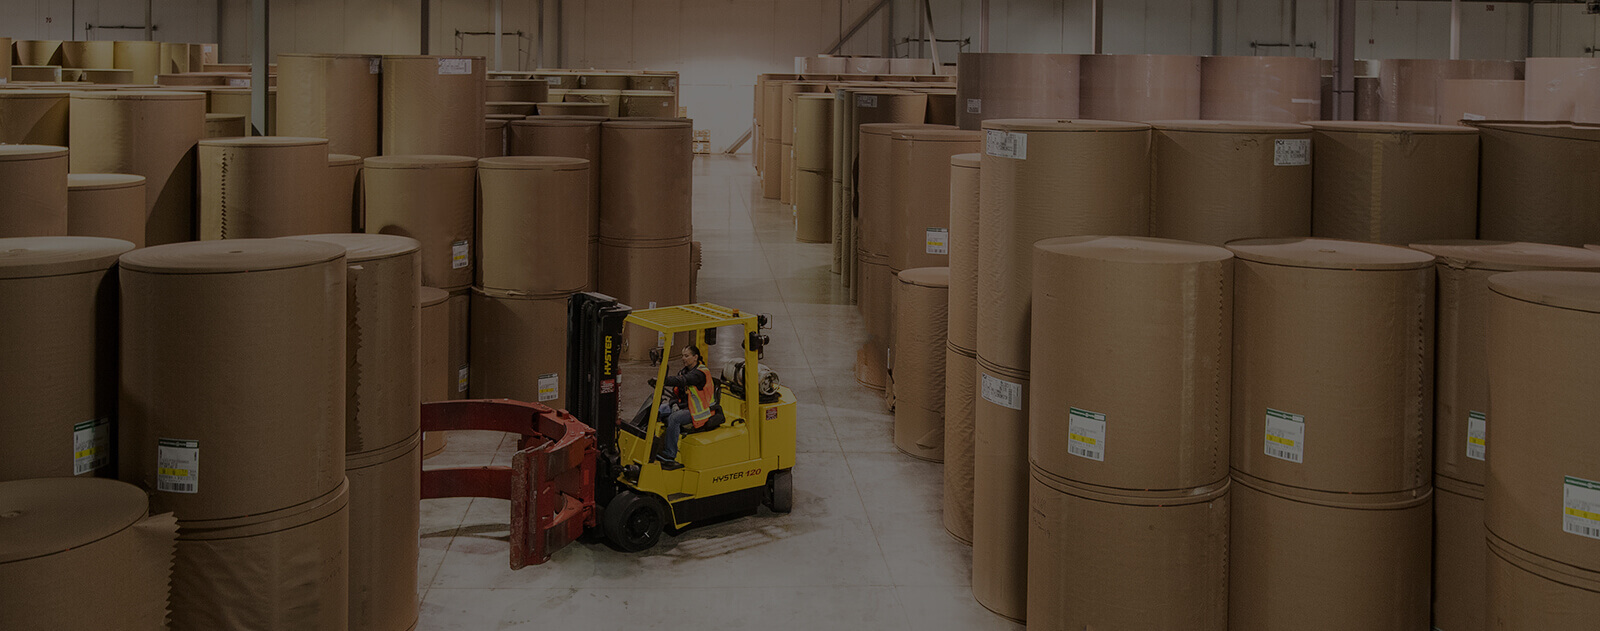 MTE warehouse_pulp & paper-forklift with clamp attachment moving paper rolls